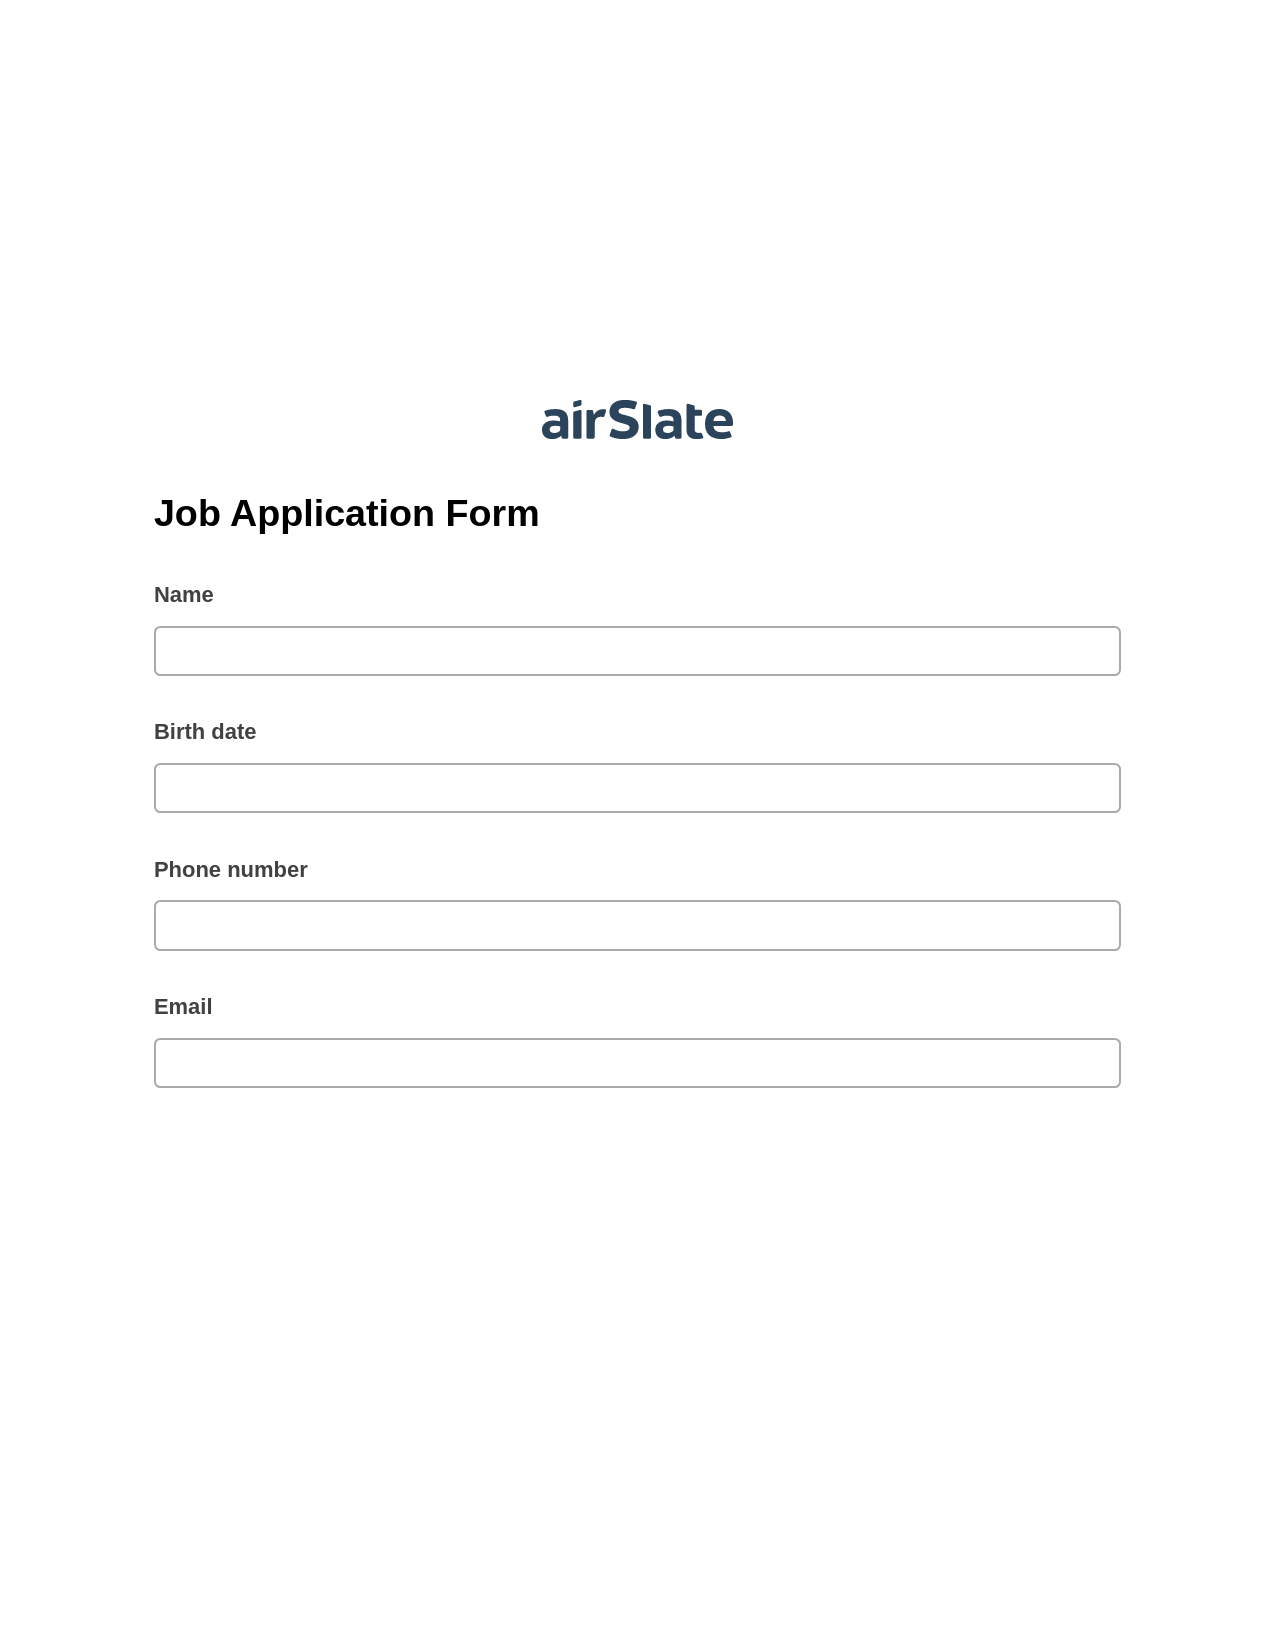 Multirole Job Application Form Pre-fill from Google Sheet Dropdown Options Bot, Create MS Dynamics 365 Records Bot, Email Notification Postfinish Bot